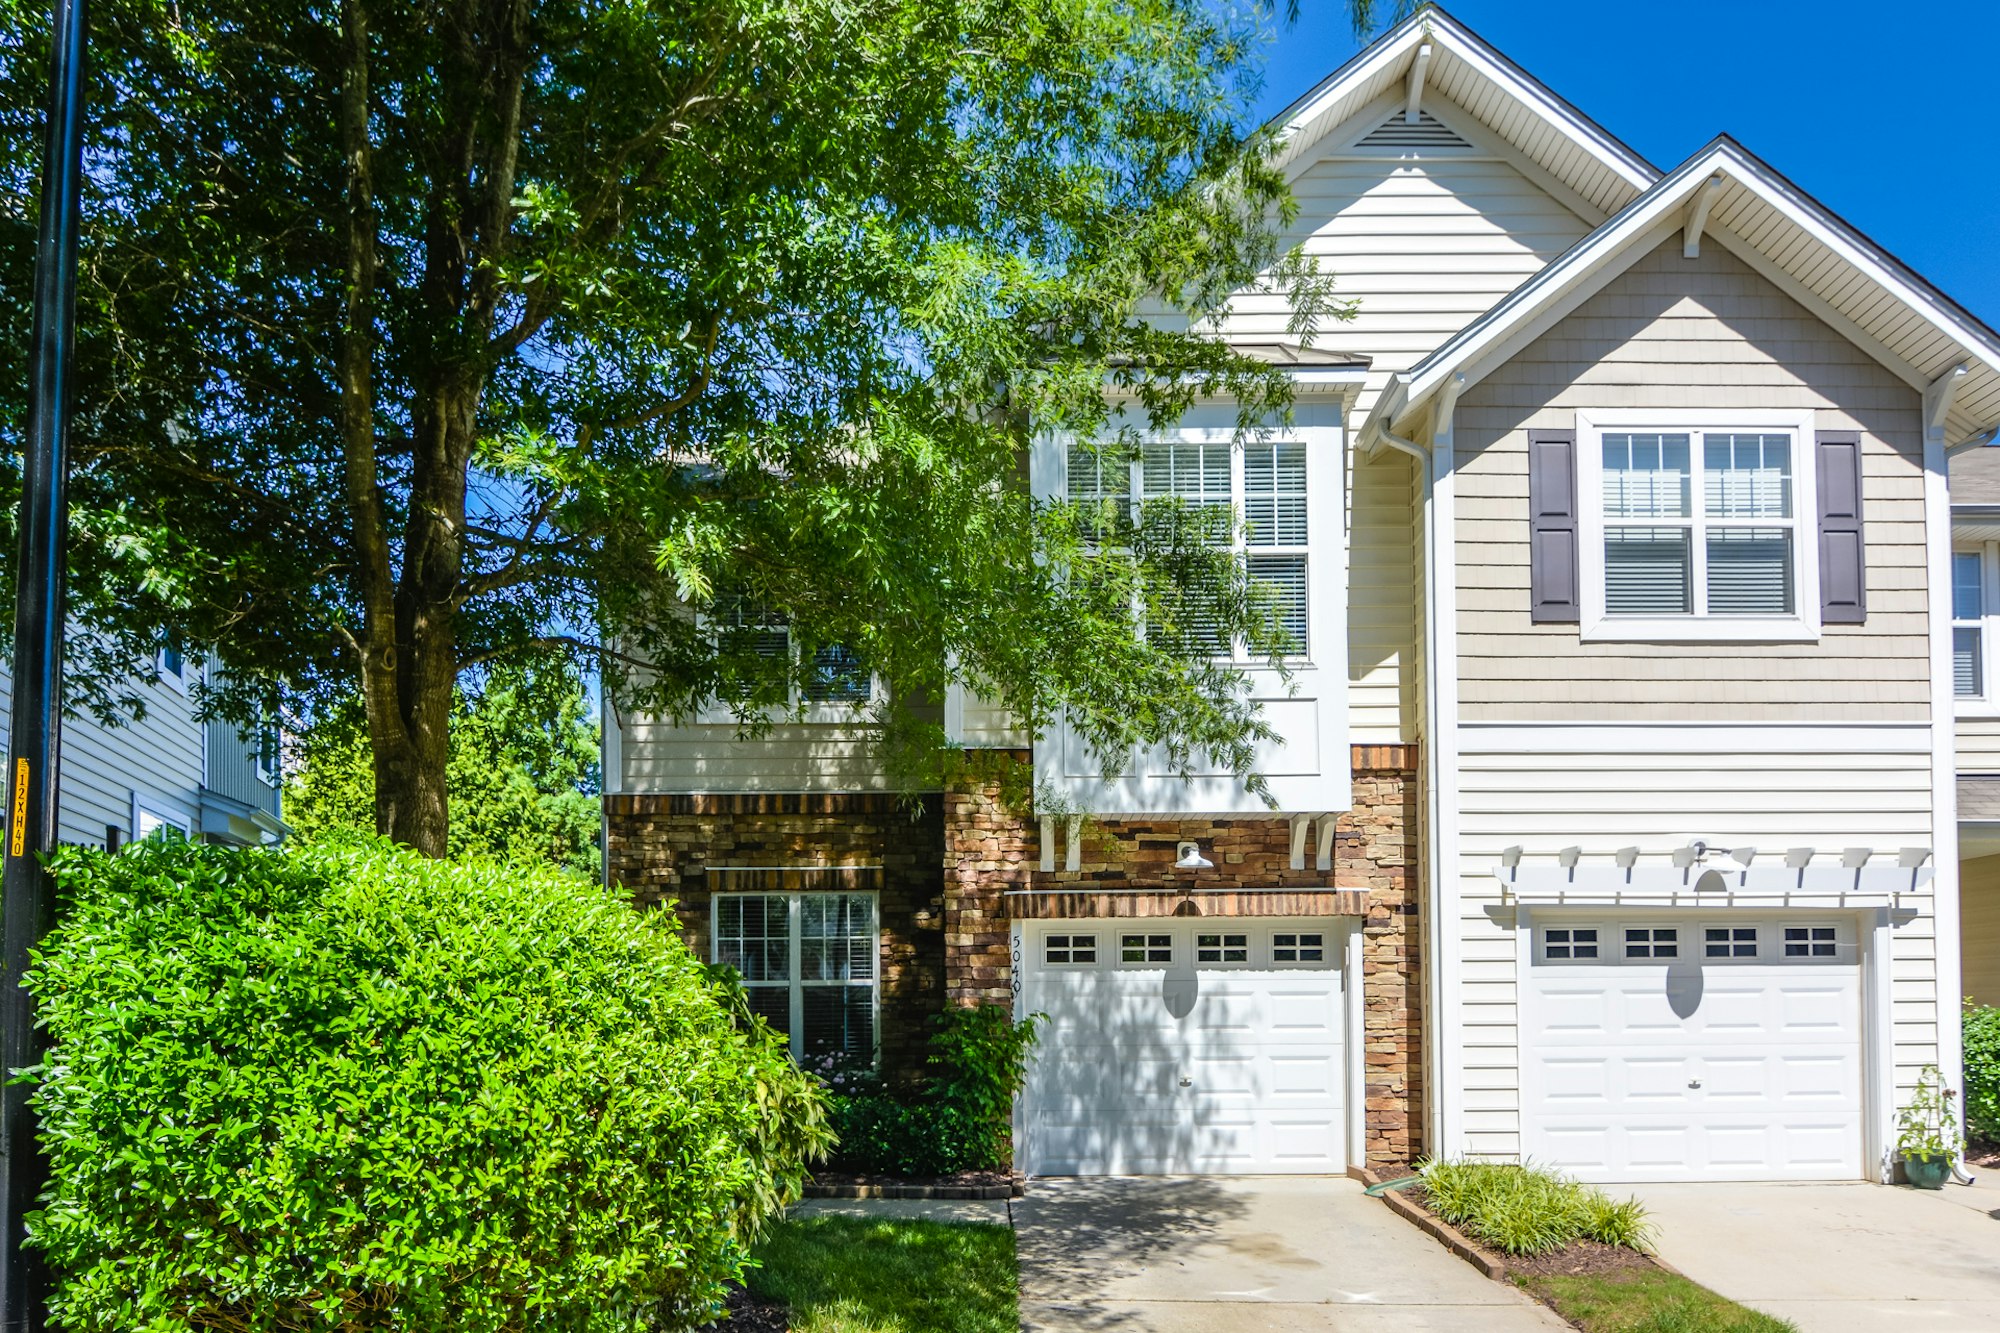 Photo 1 of 22 - 5040 Amber Clay Ln, Raleigh, NC 27612